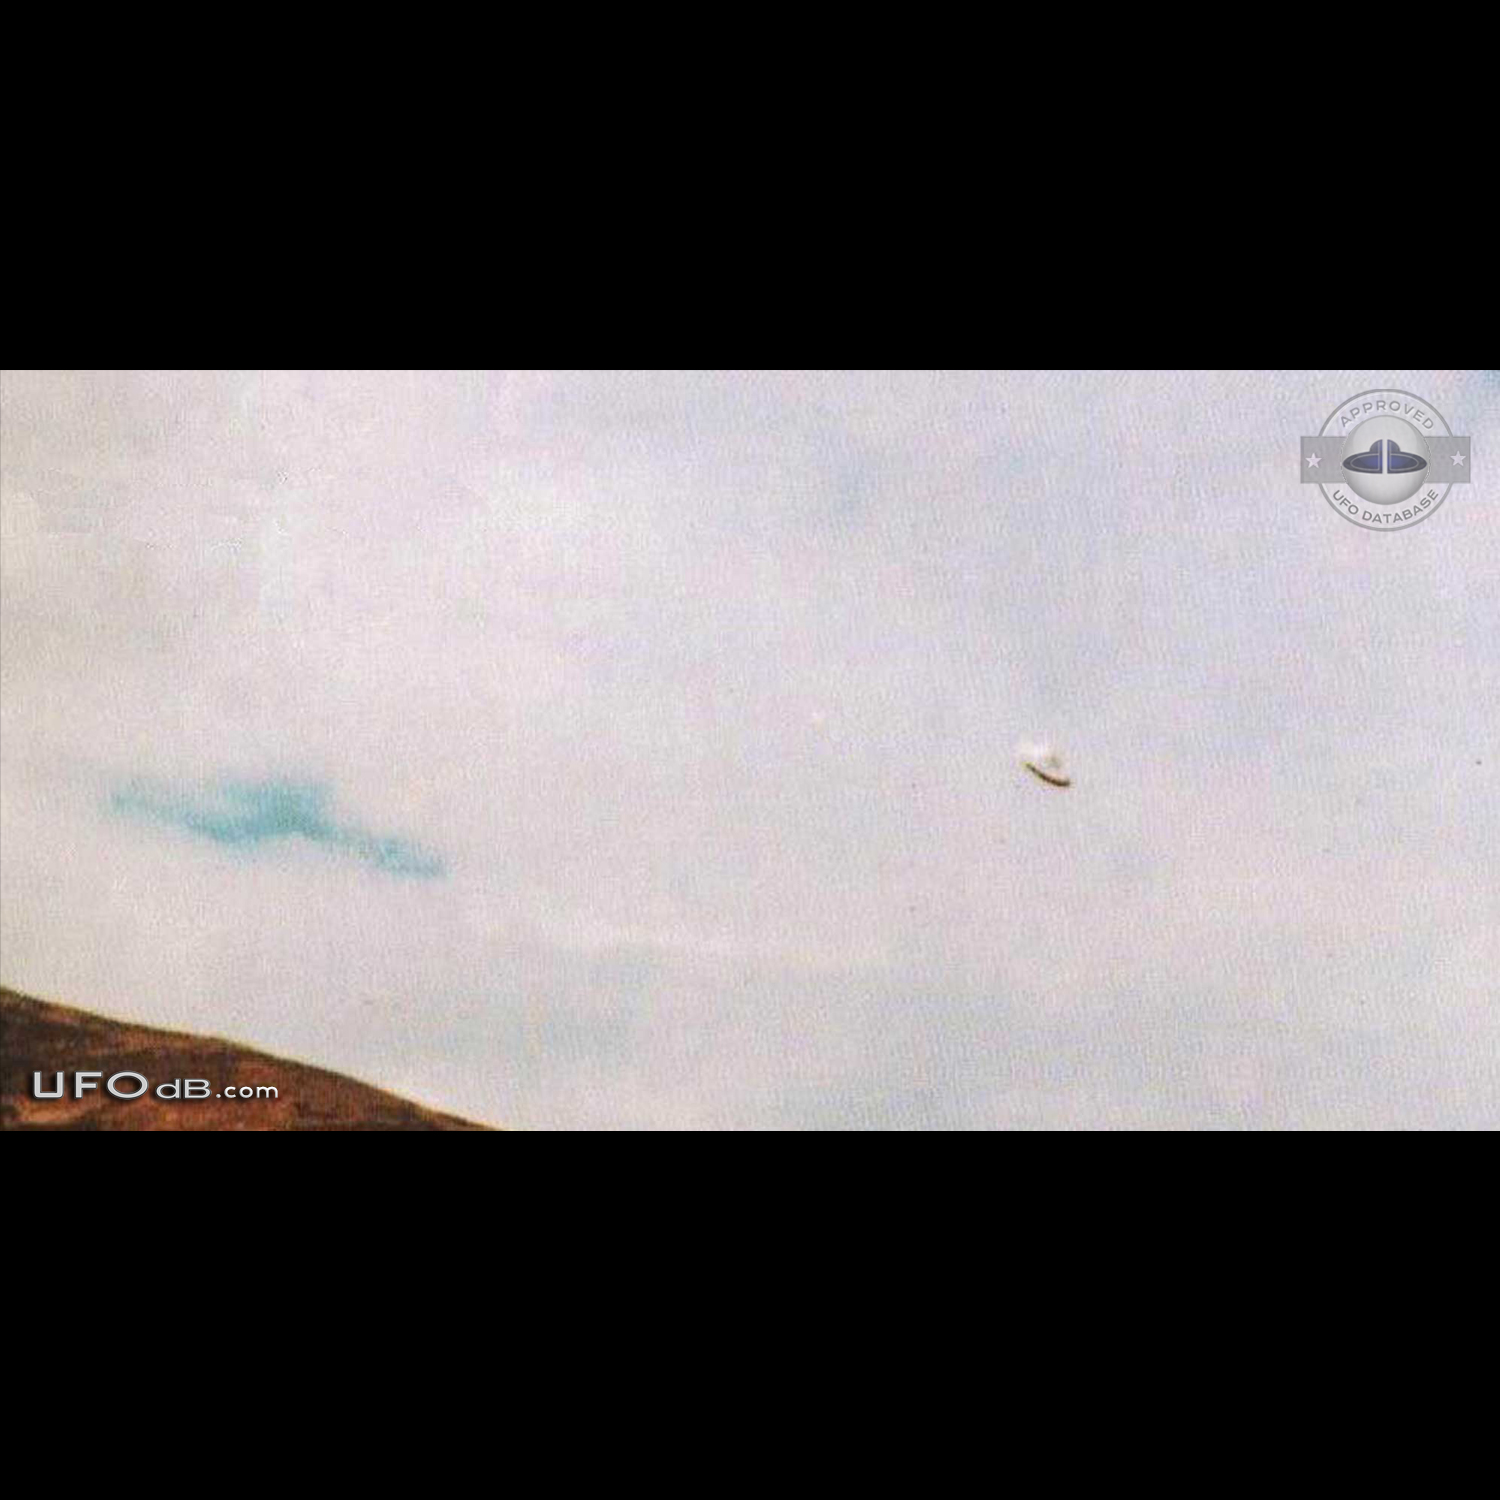 1967 Peru UFO sighting caught on pictures Huaylas Valley Yungay Ancash UFO Picture #440-5